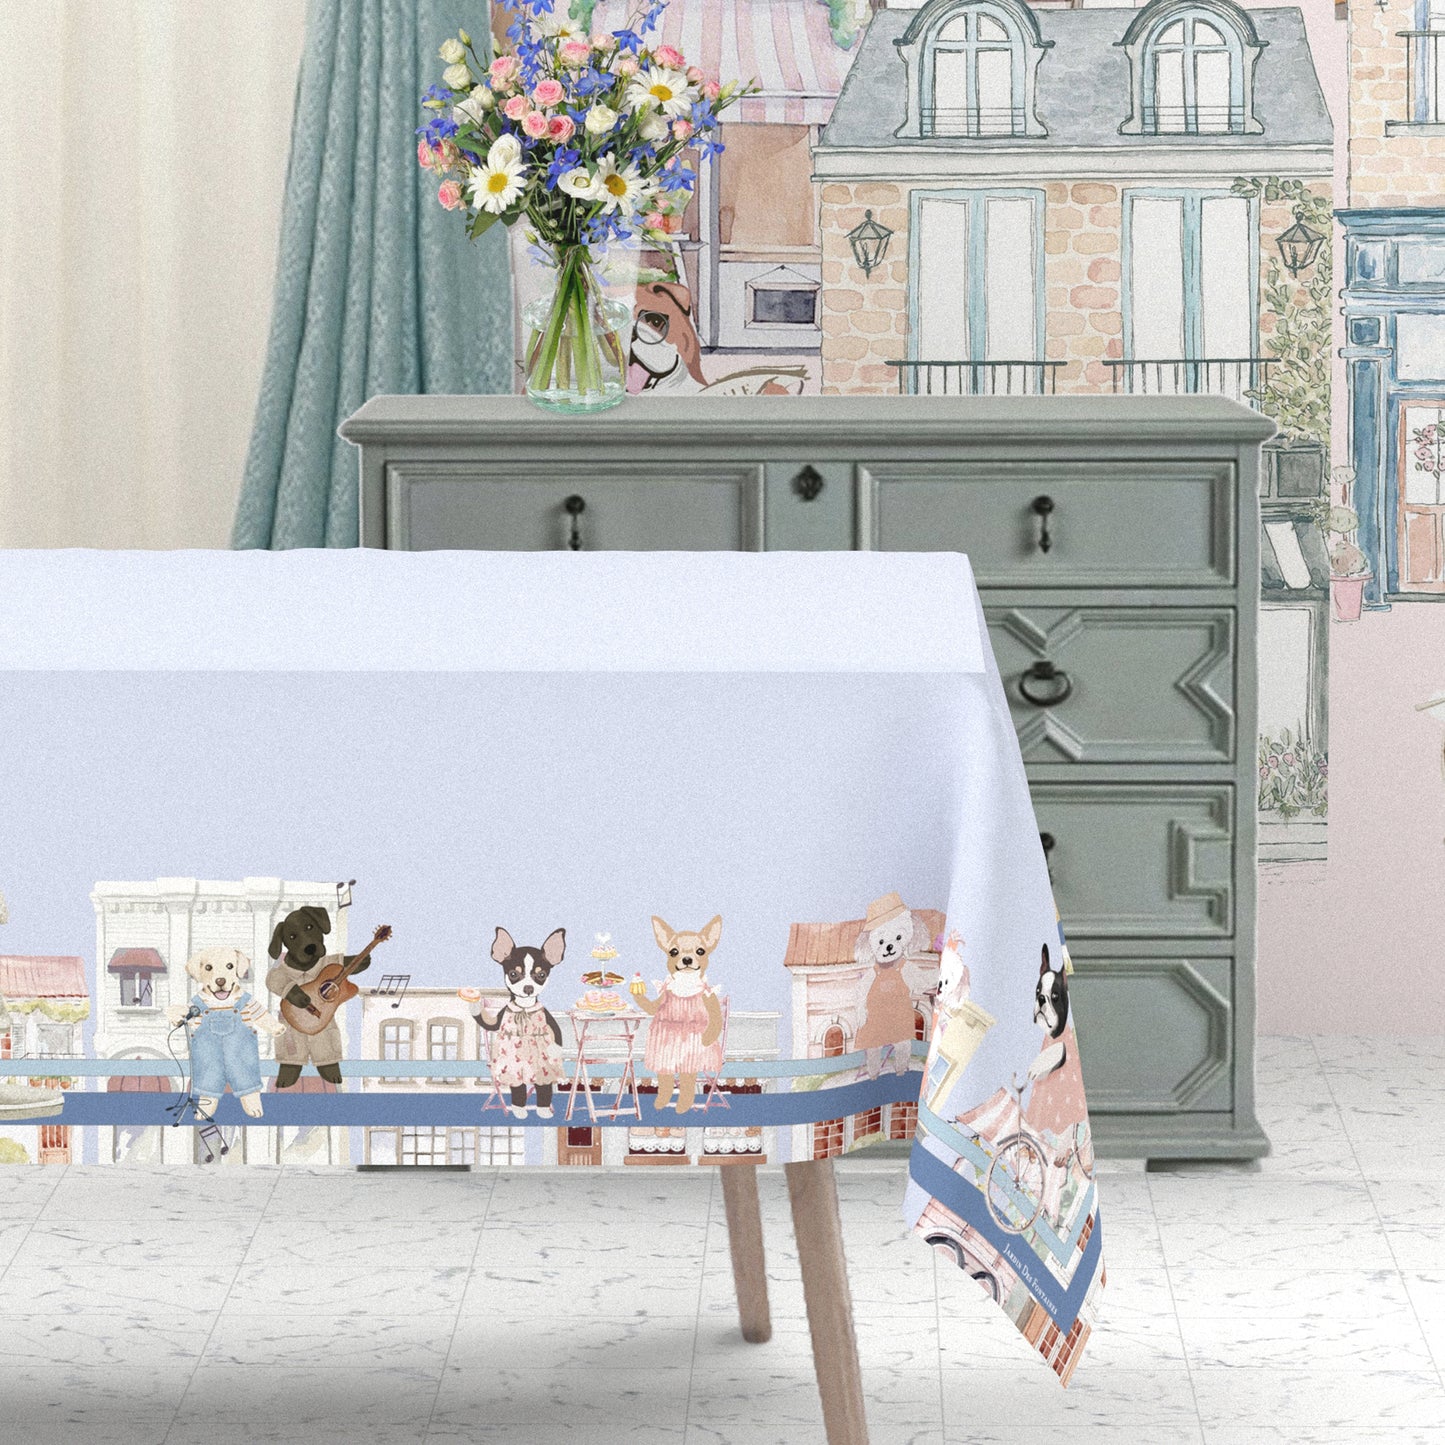 "Oh My Dog" Waterproof Tablecloth